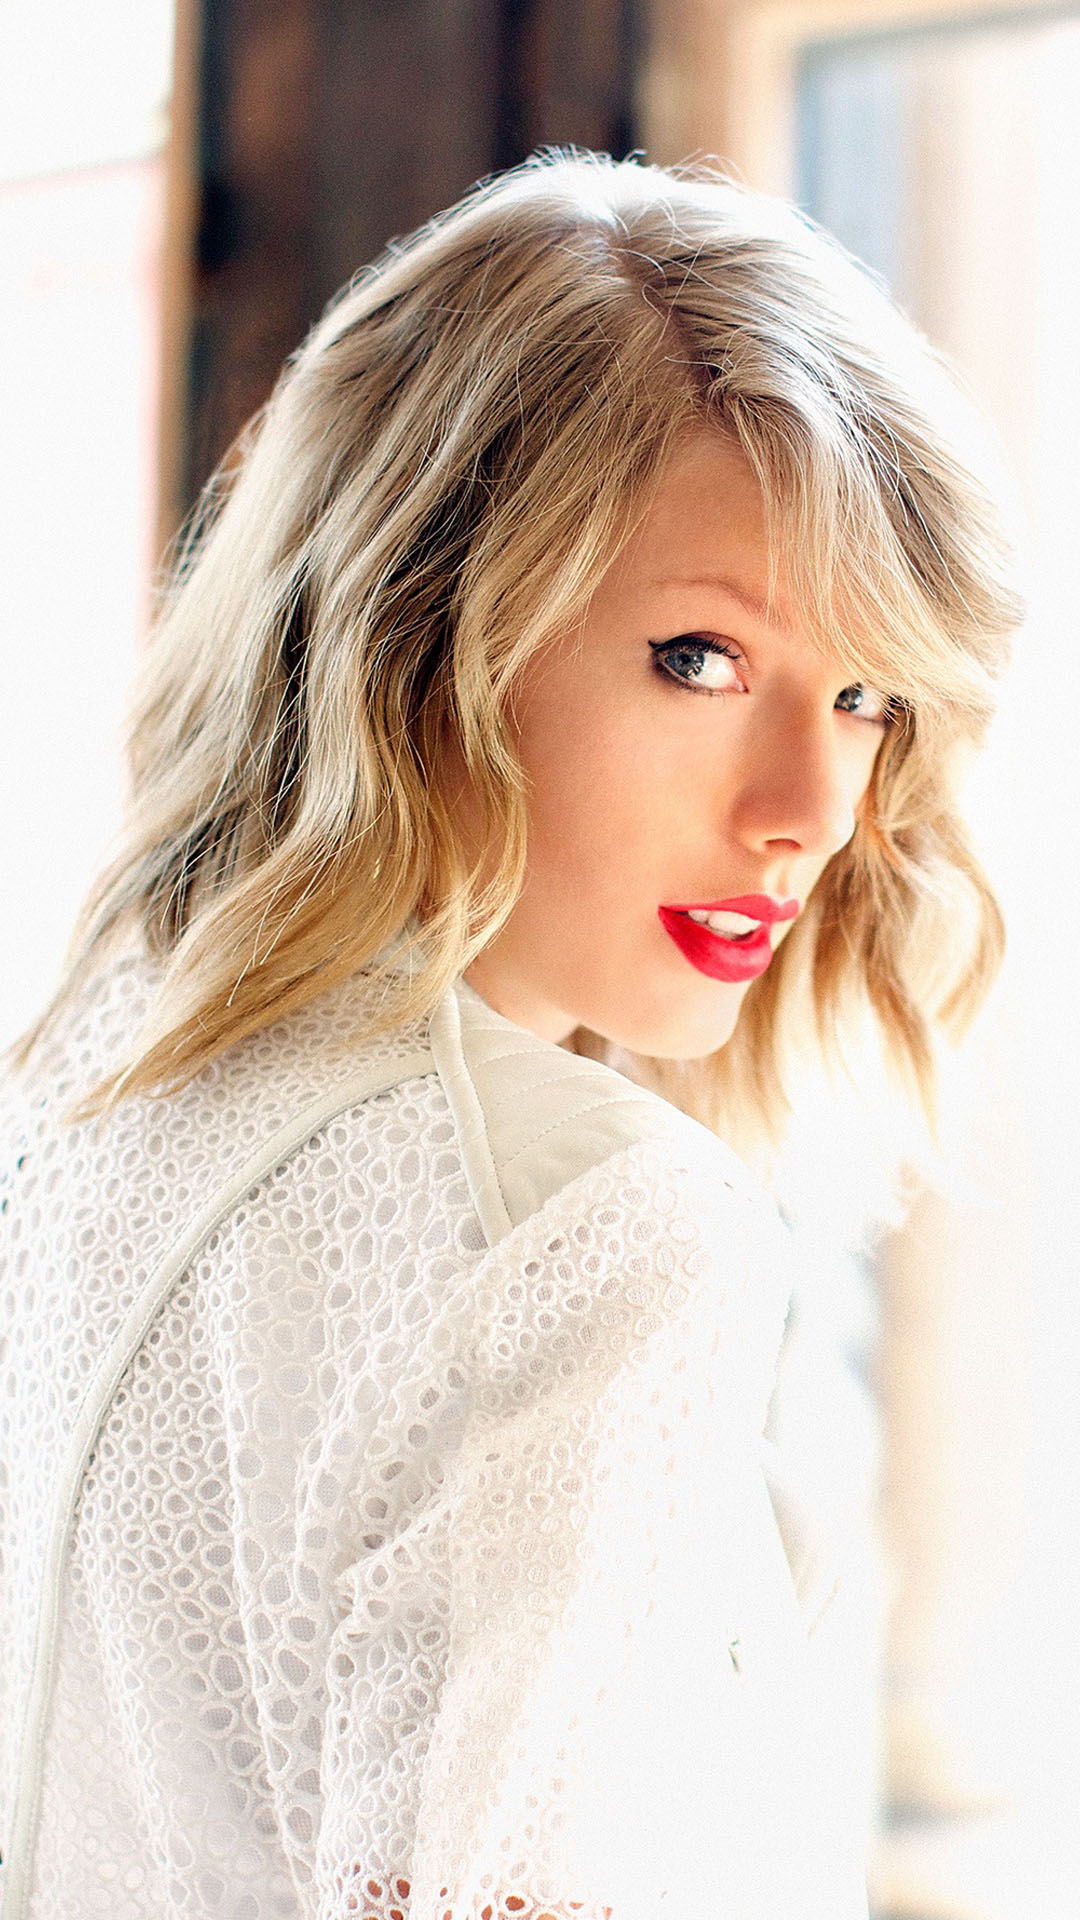 taylor swift iphone wallpaper,hair,blond,hairstyle,face,lip